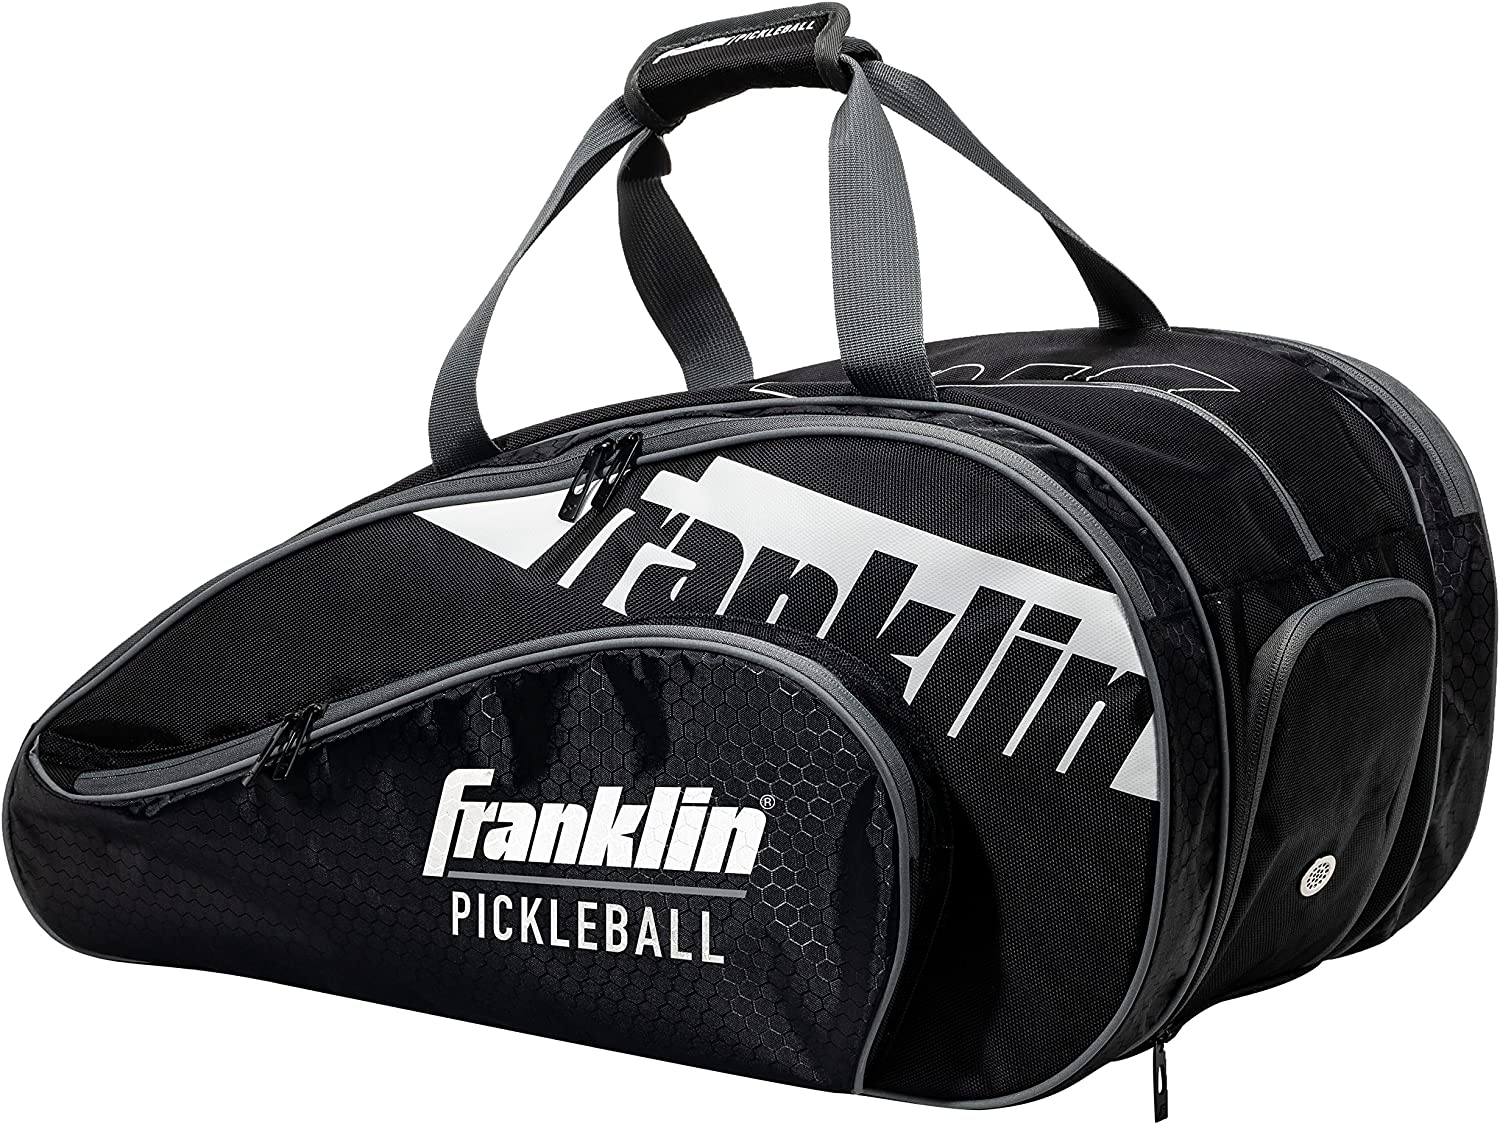 The Top Ten Pickleball Bags and Backpacks - Franklin